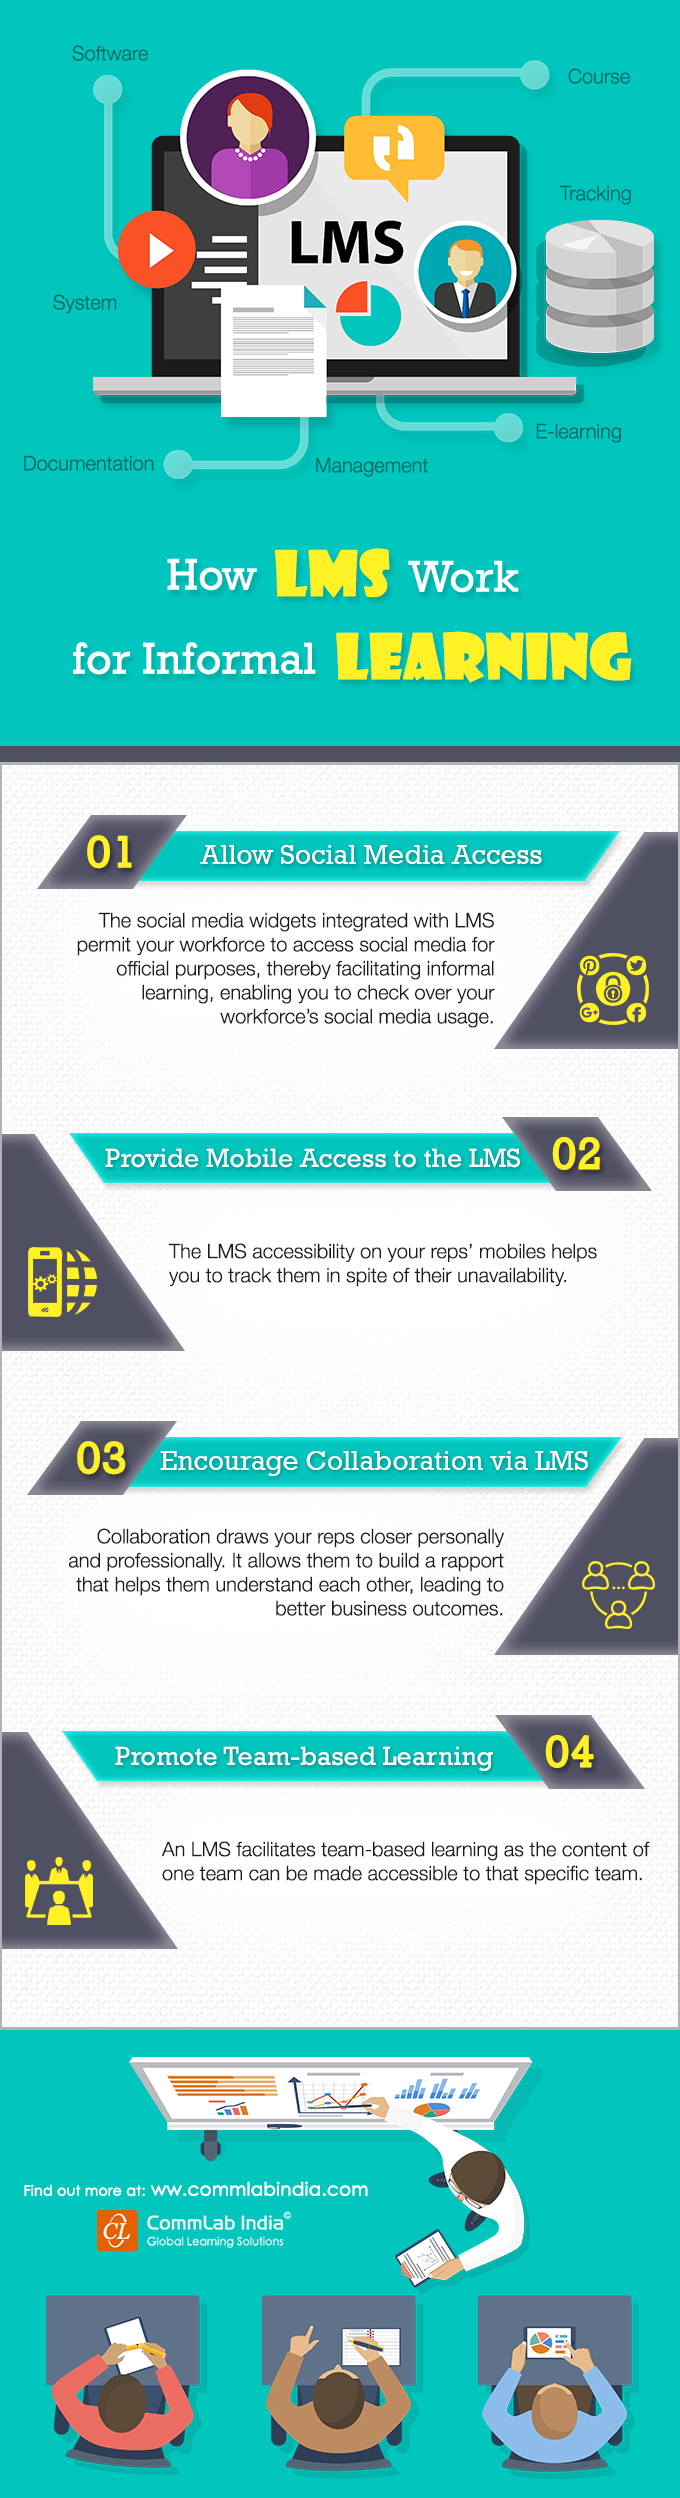 How LMS Works for Informal Learning [Infographic]